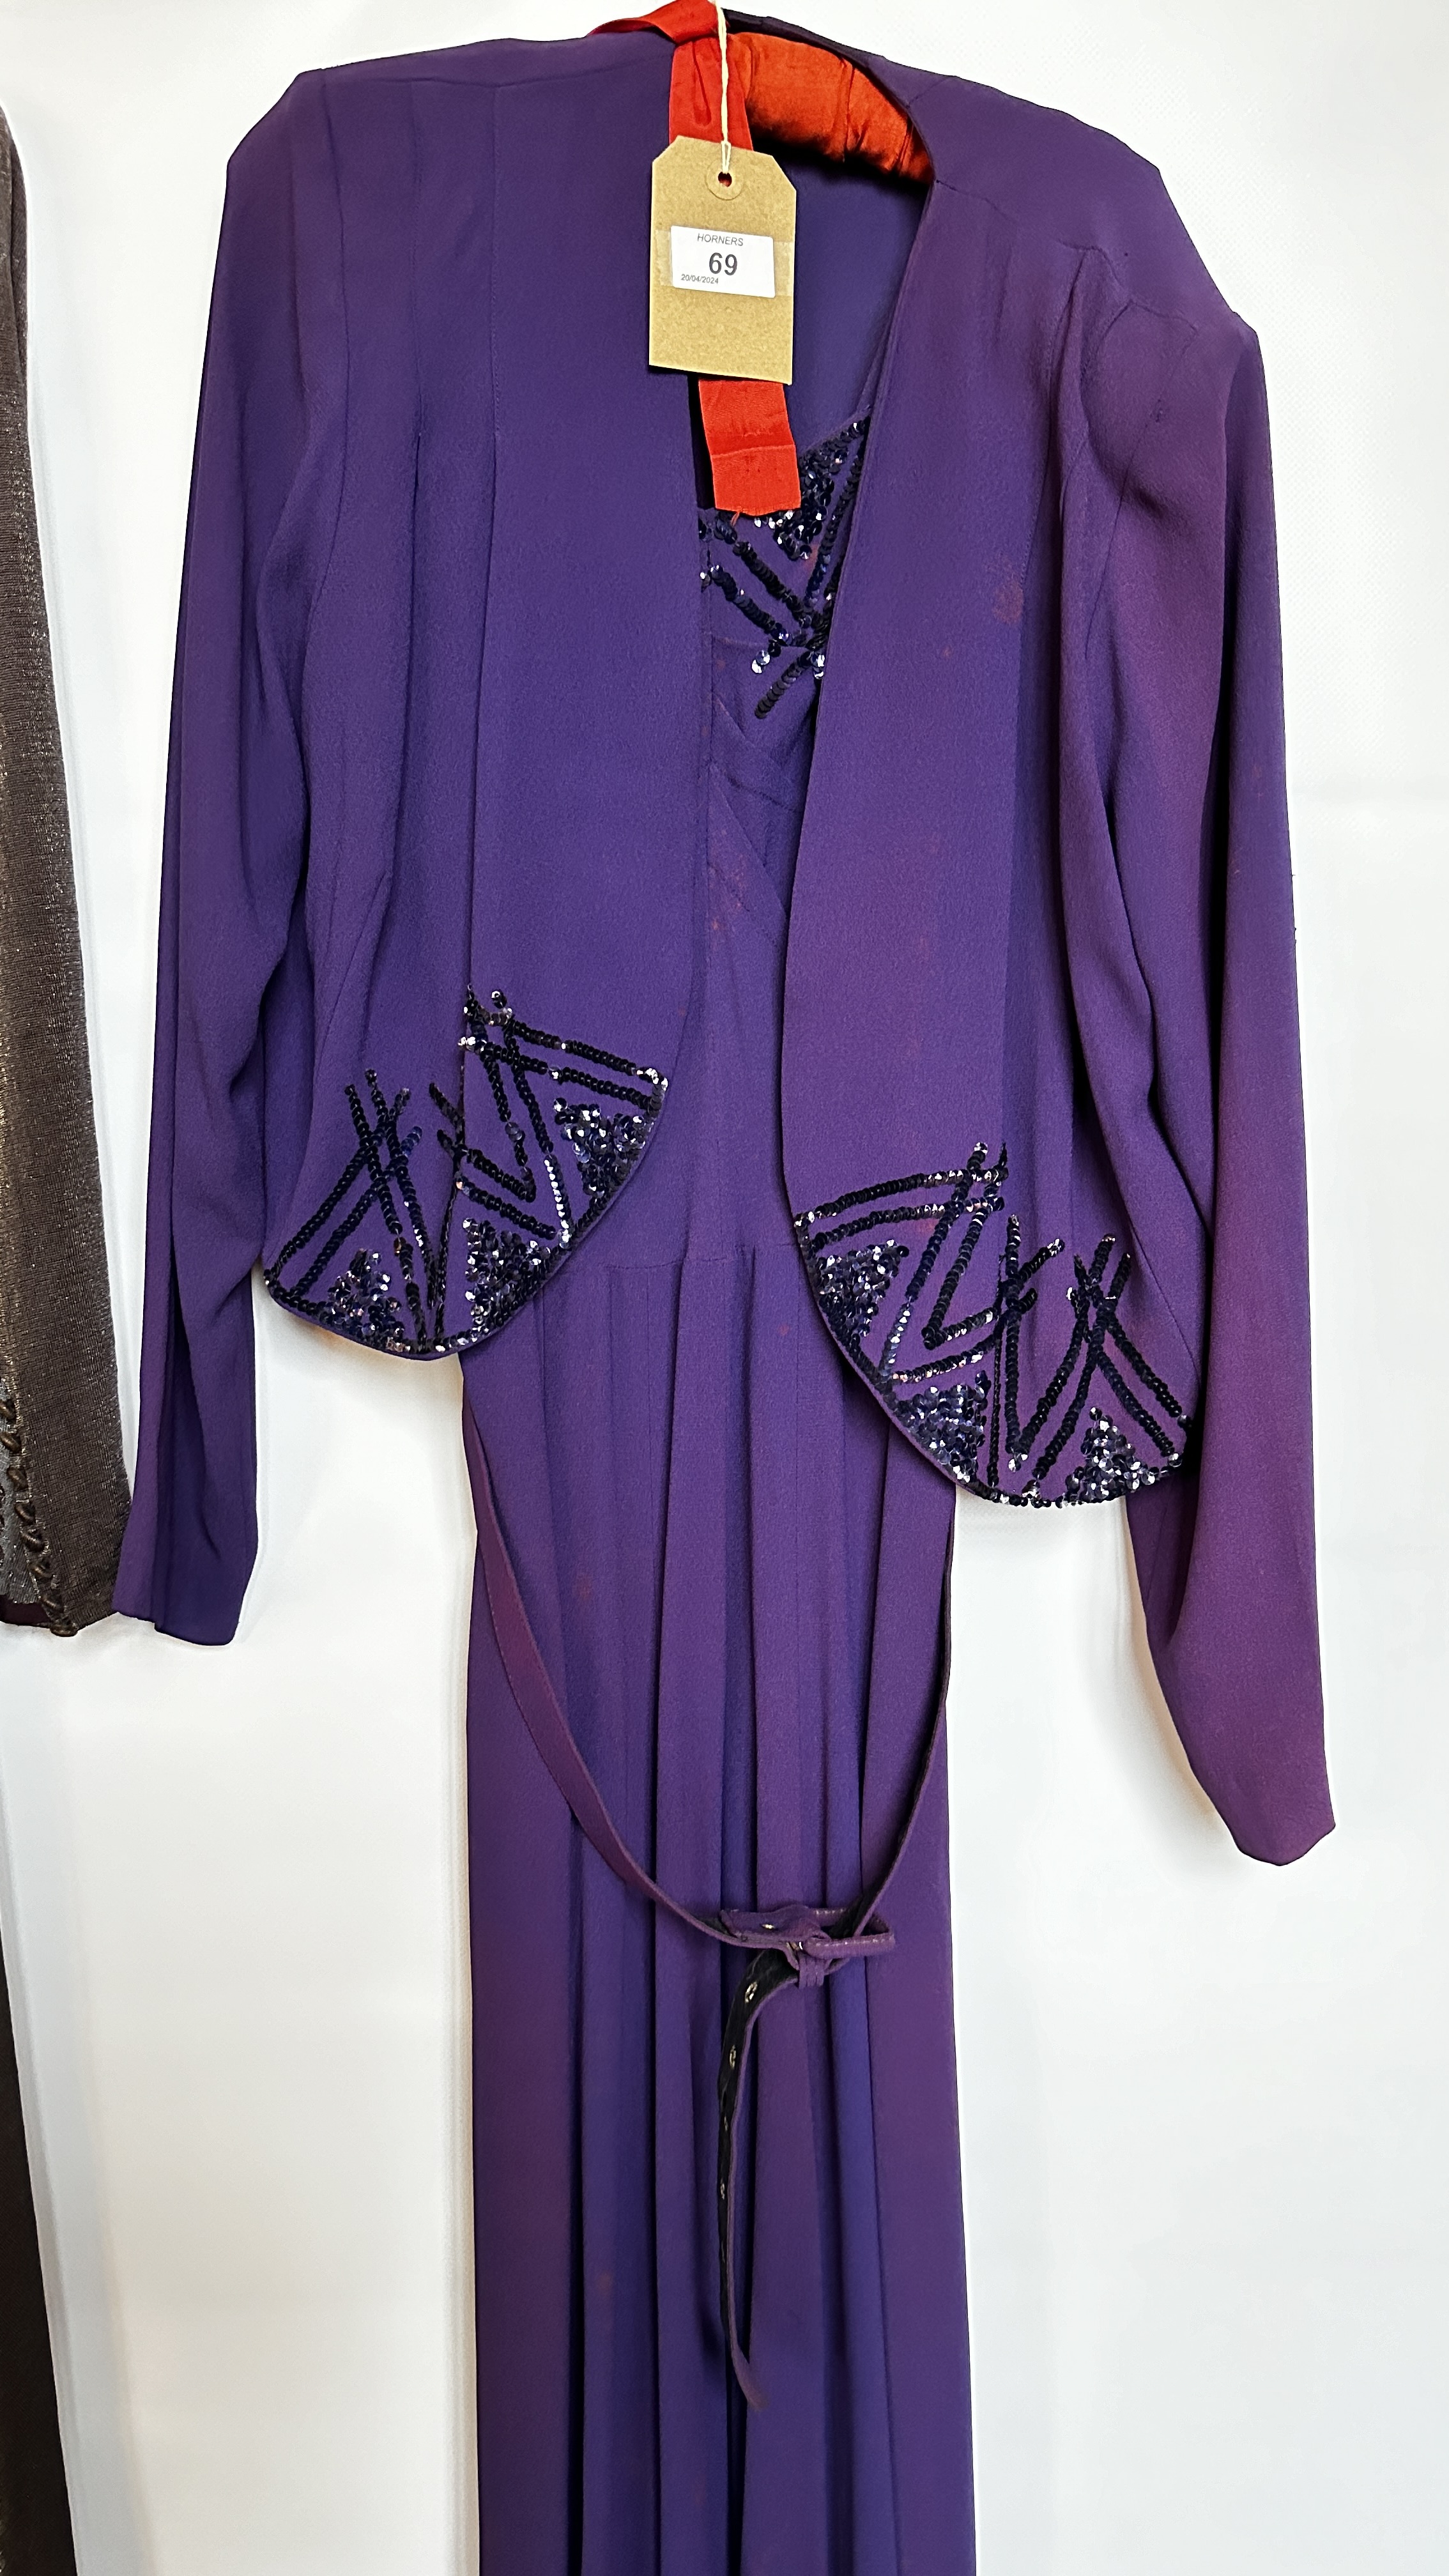 1940S PURPLE EVENING DRESS & BOLORO JACKET WITH SEQUIN DECORATION ON BODICE AND JACKET AND A 1940S - Image 12 of 37